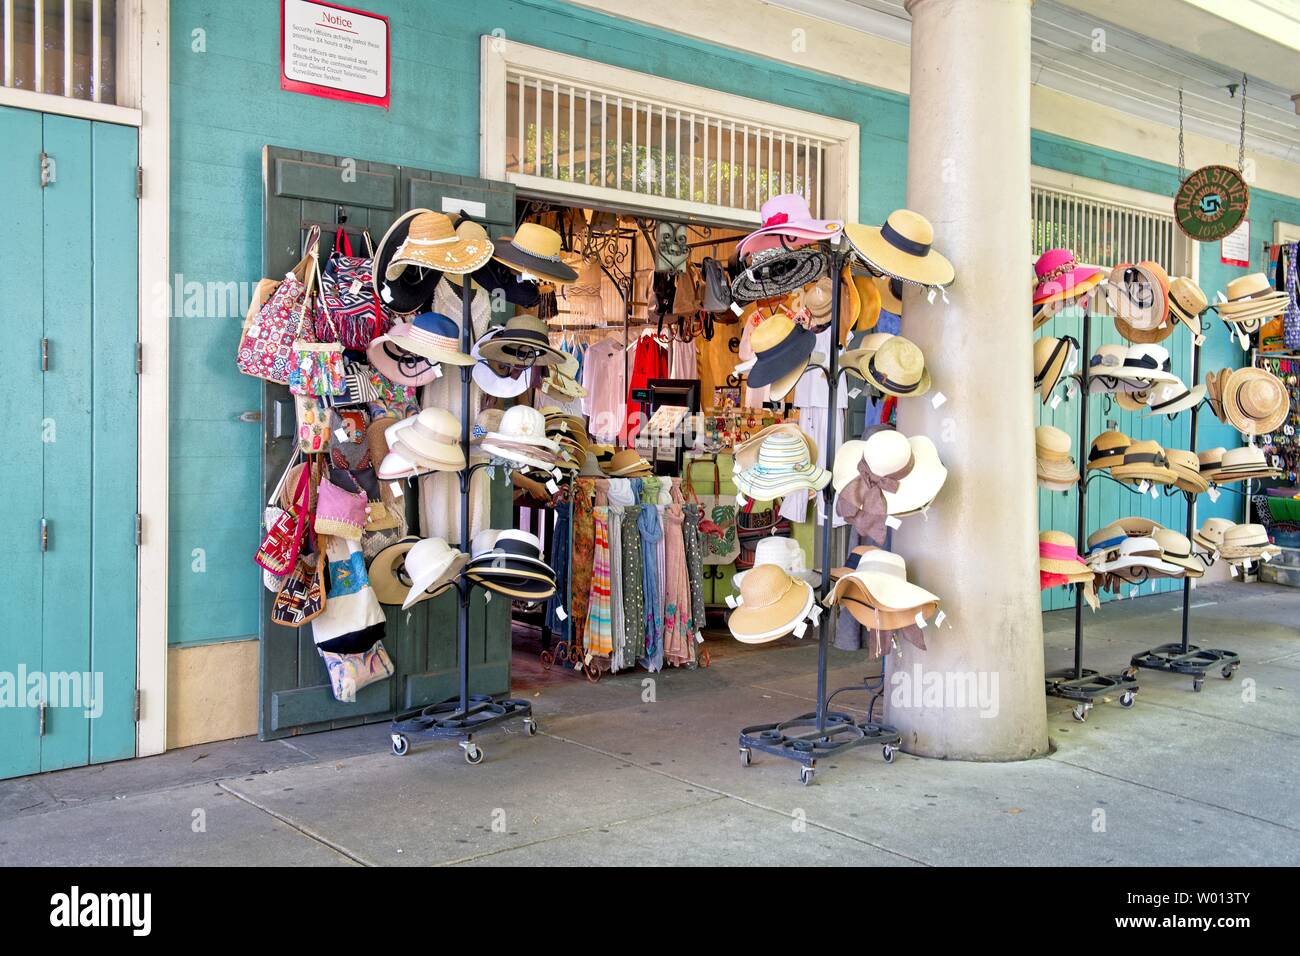 Racks of hats hang on stands outside a clothing store Stock Photo